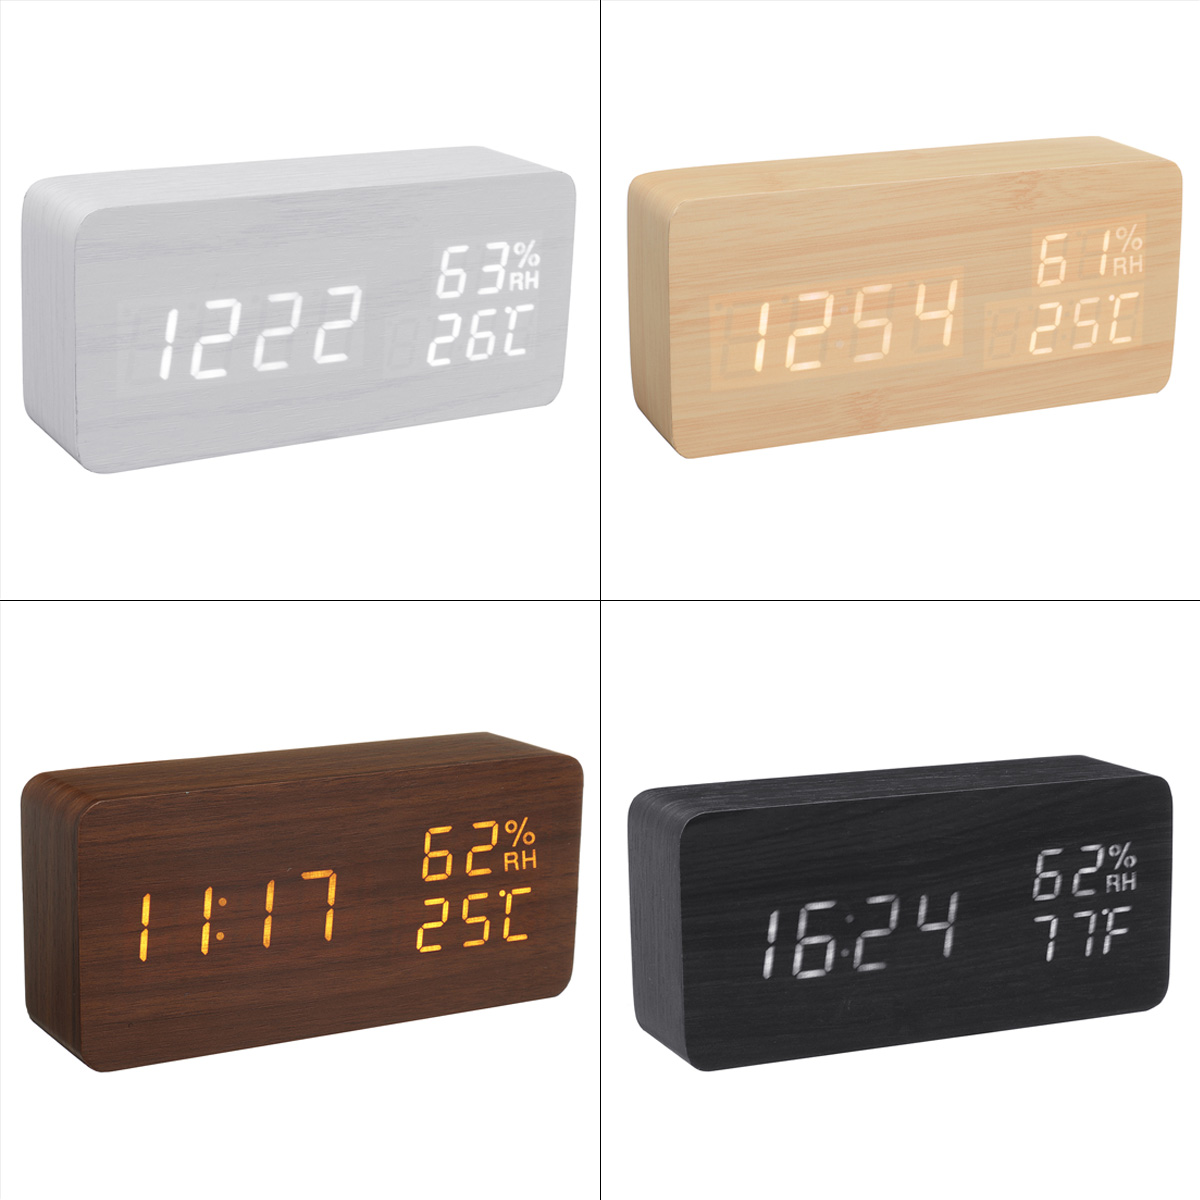 Modern-Wooden-Wood-Digital-Thermometer-USB-Charger-LED-Desk-Alarm-Wireless-Clock-1739446-5